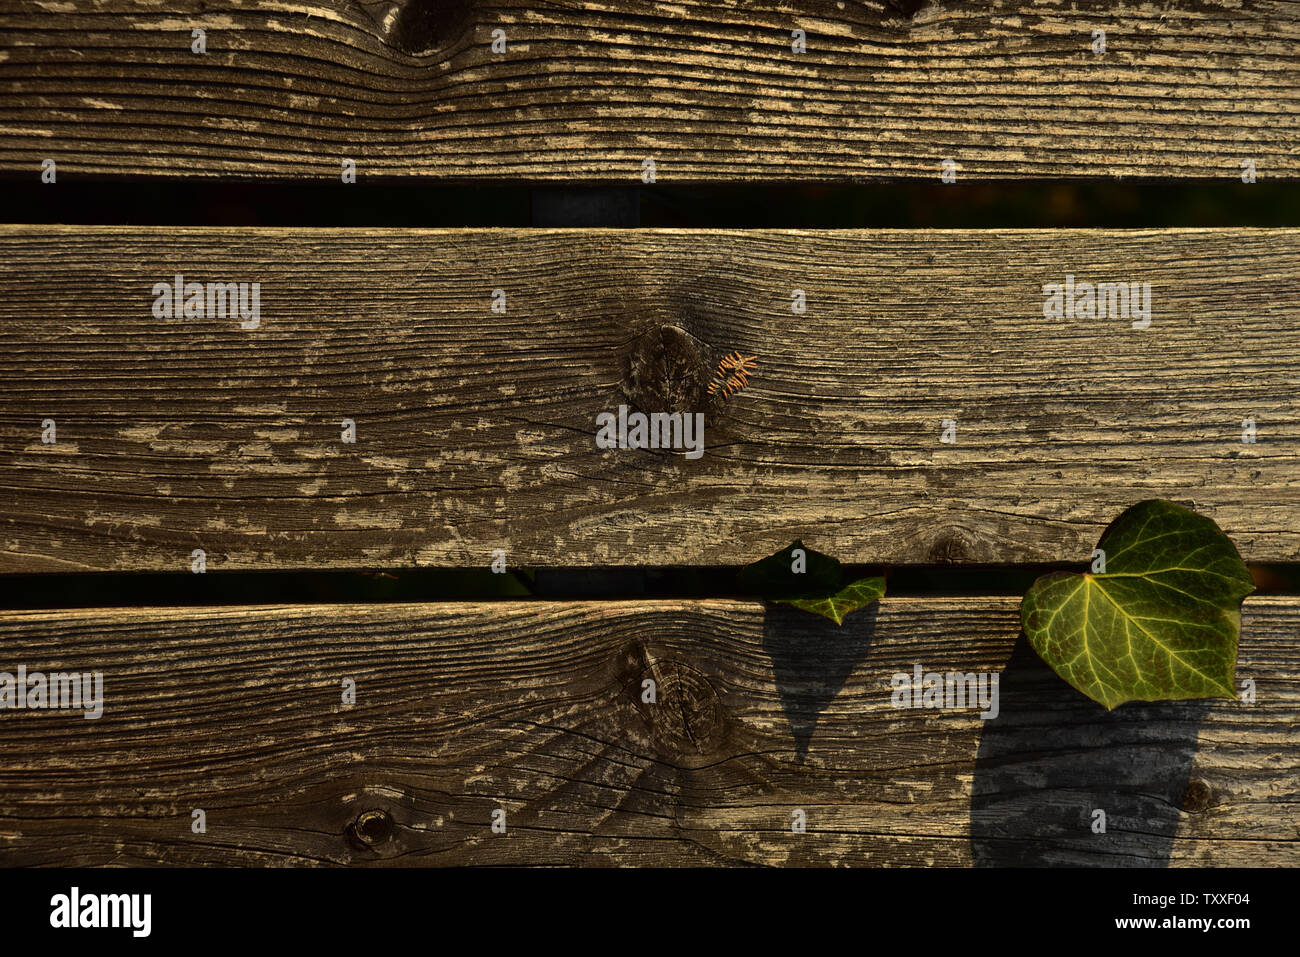 Background of wooden slats of a brown wooden fence with ivy leaves growing out of it Stock Photo